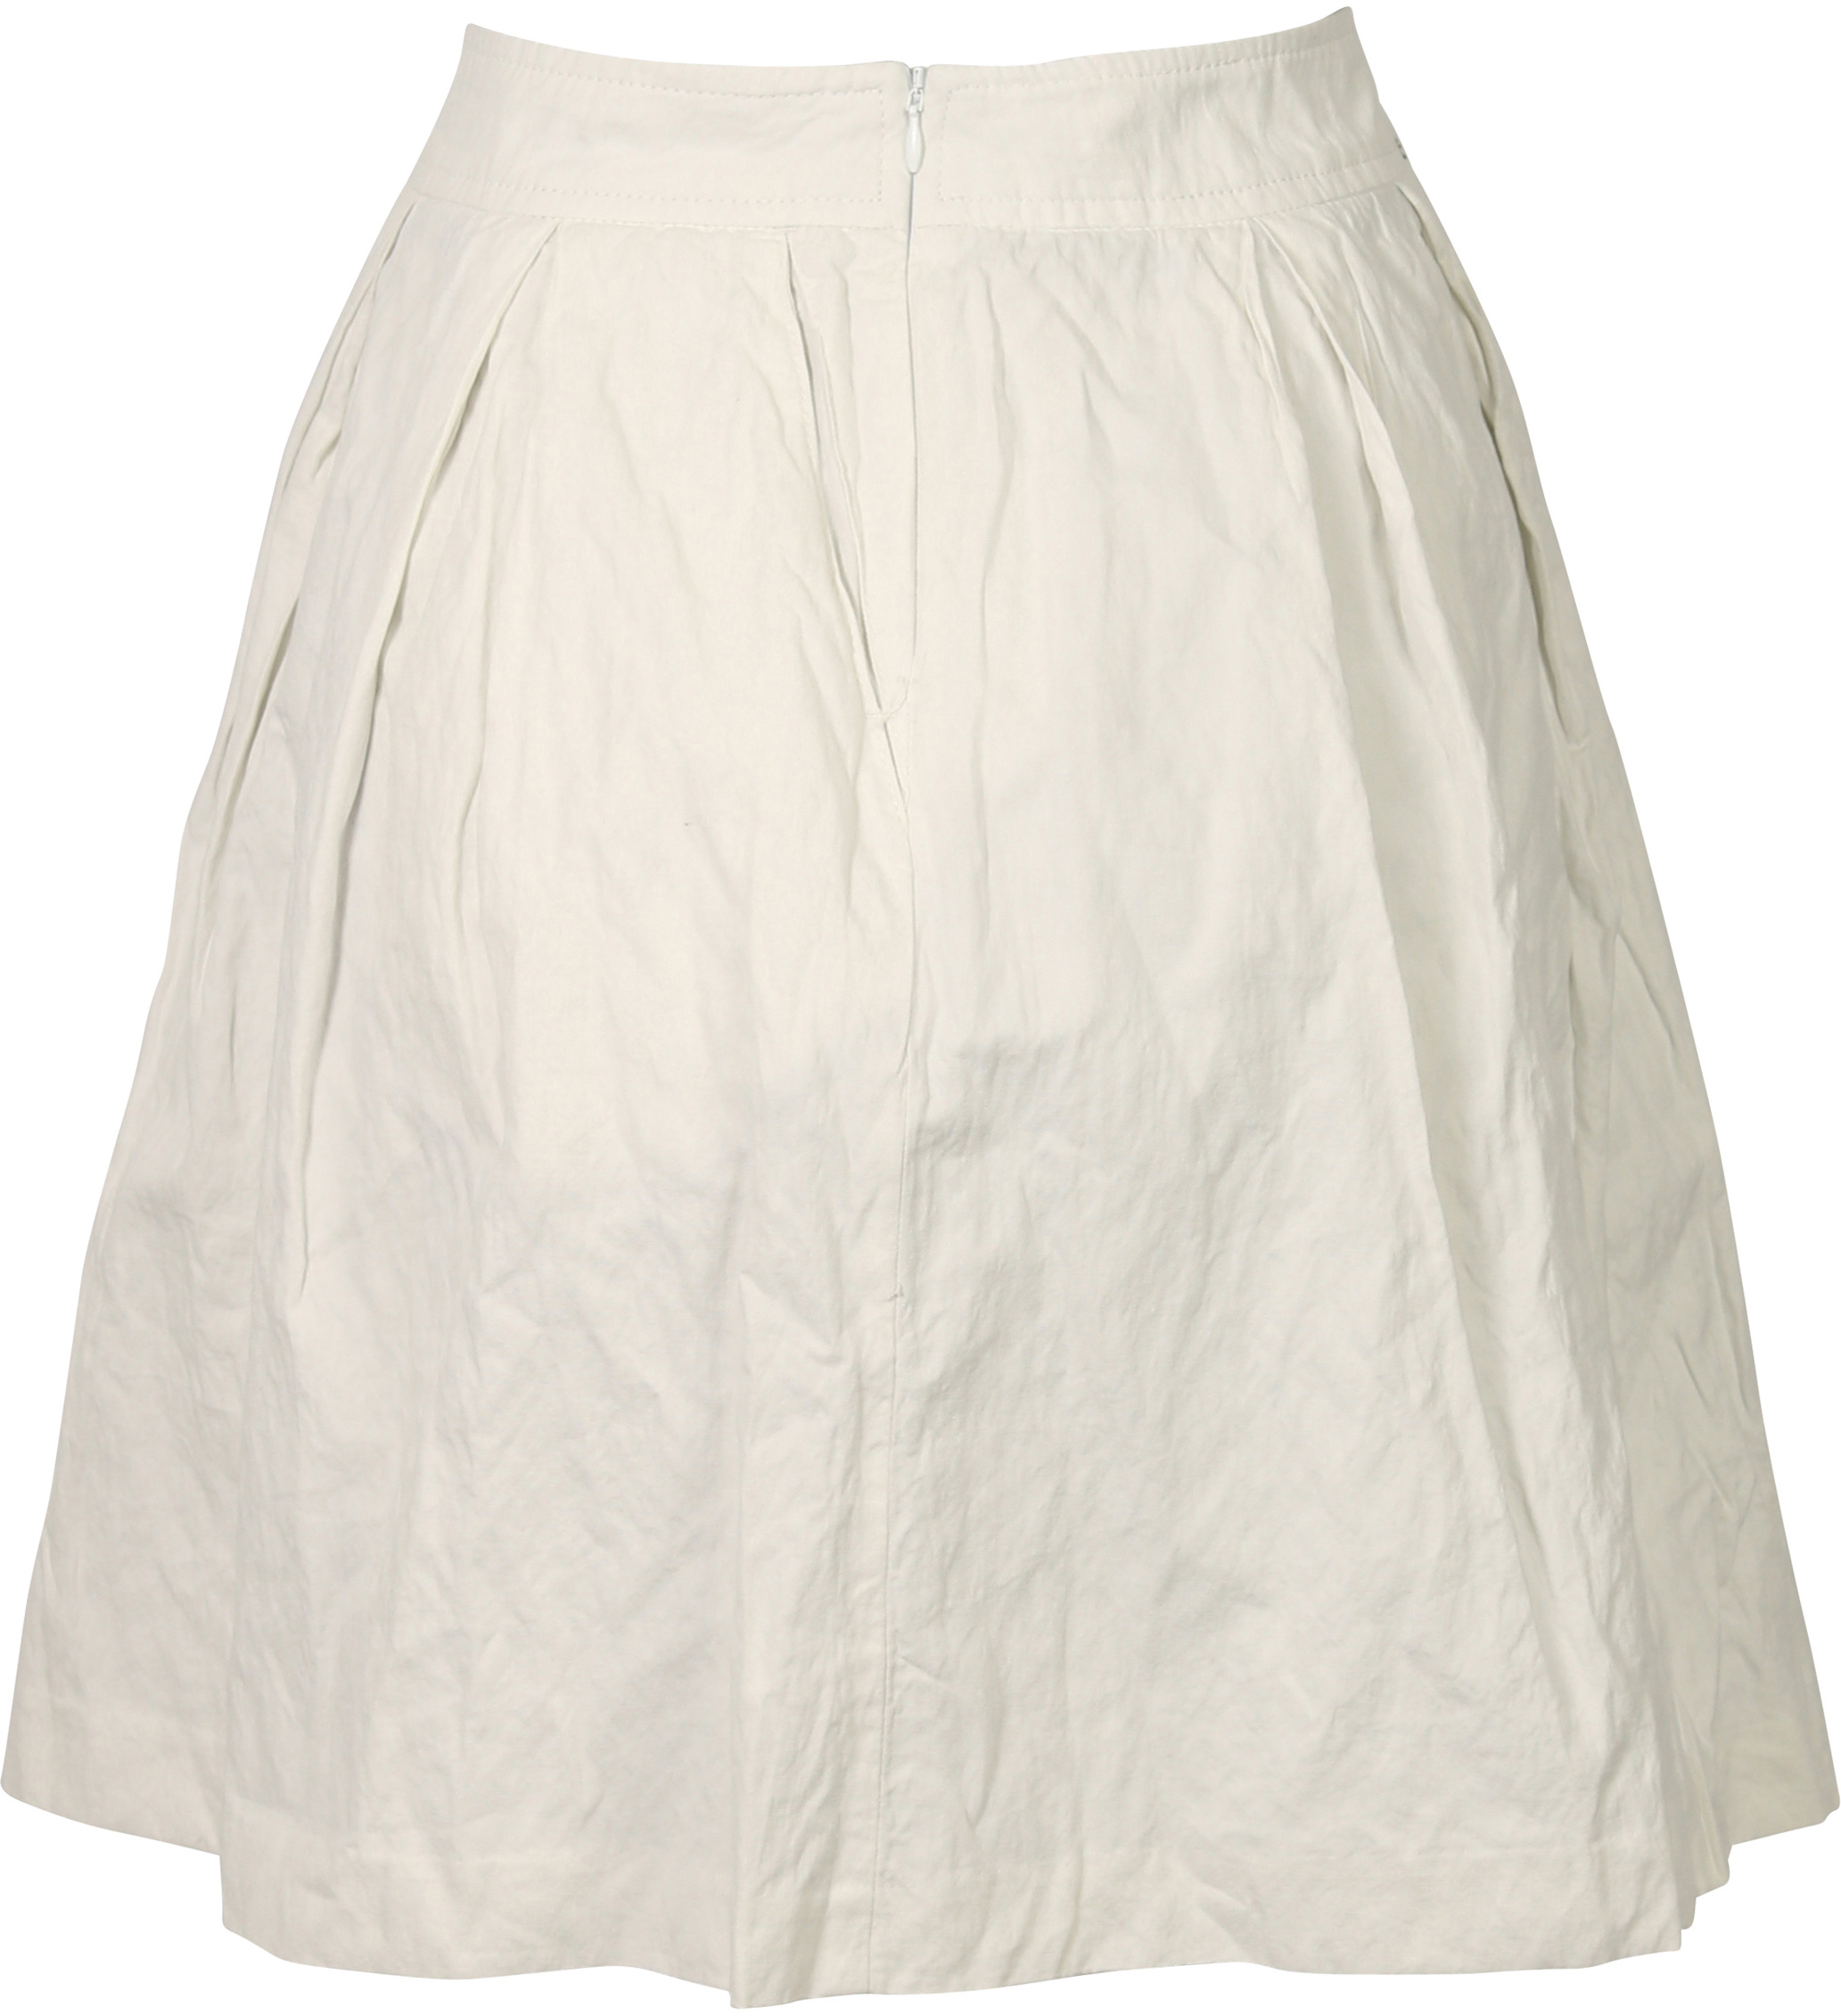 Hannes Roether Skirt Offwhite XL